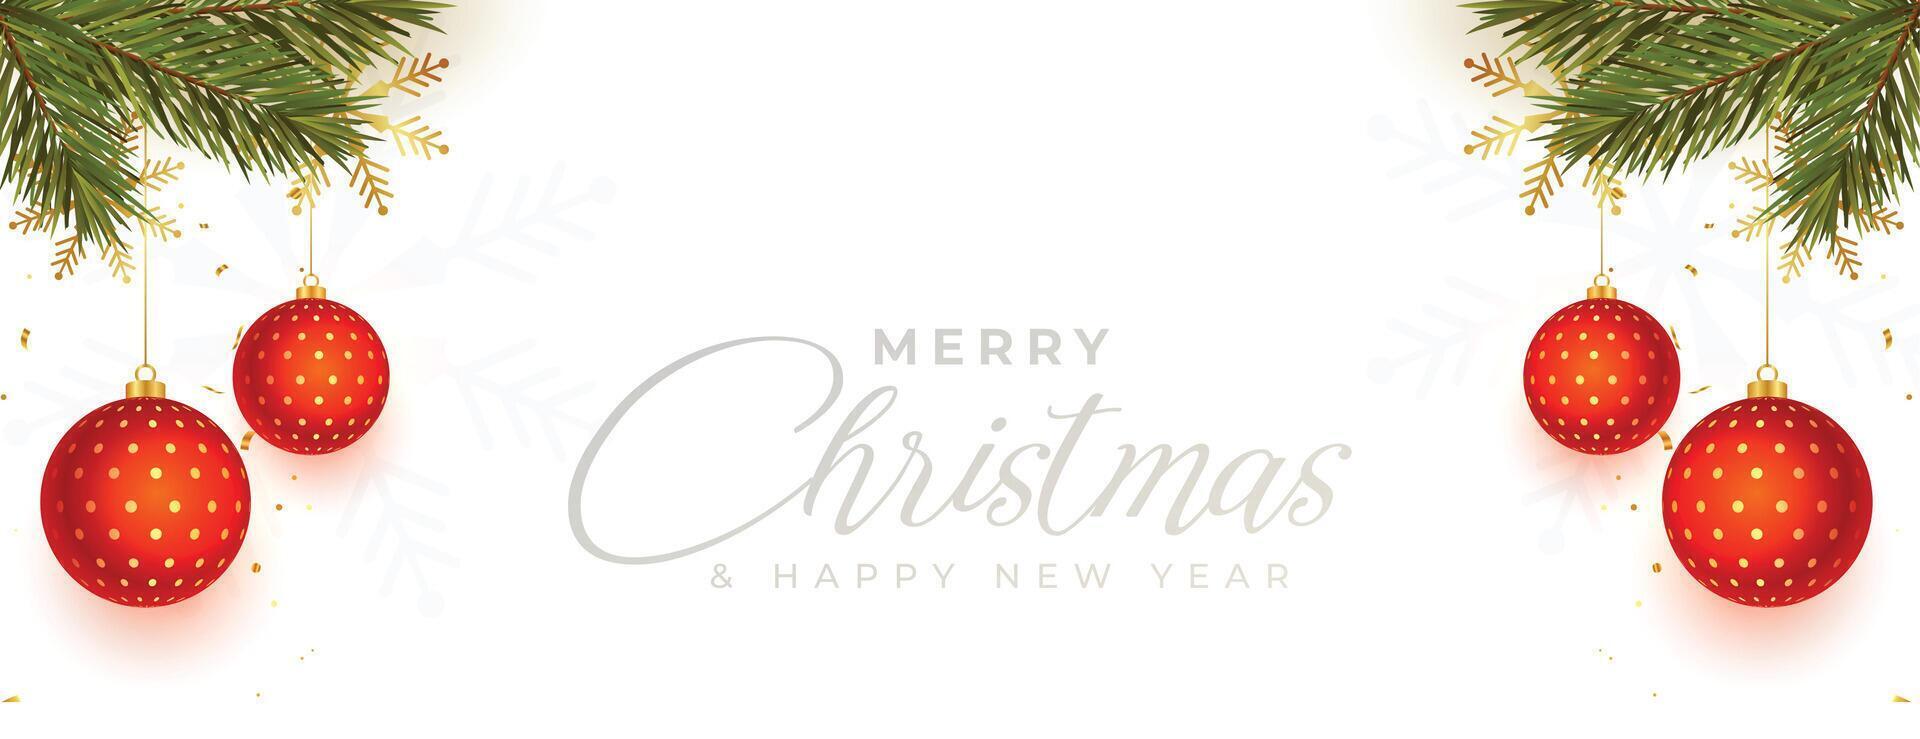 realistic merry christmas and new year banner with xmas balls and pine tree leaves vector